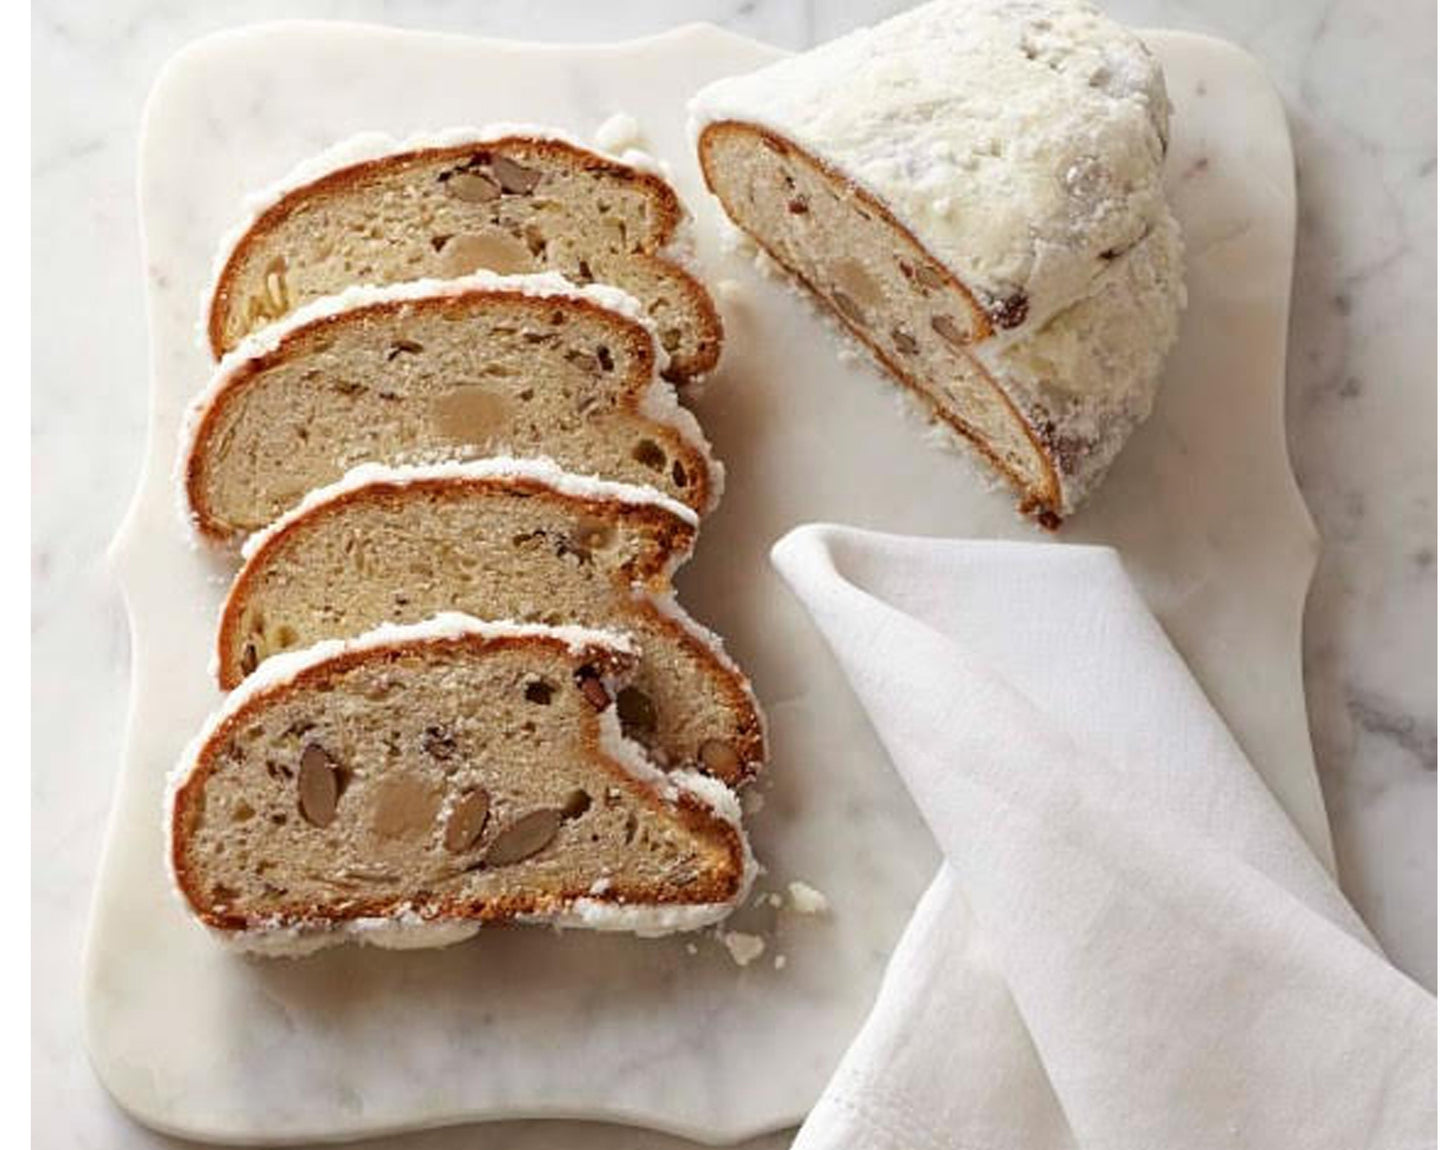 Stollen 21 Ounce Loaf Limited Edition - JaneParker.com